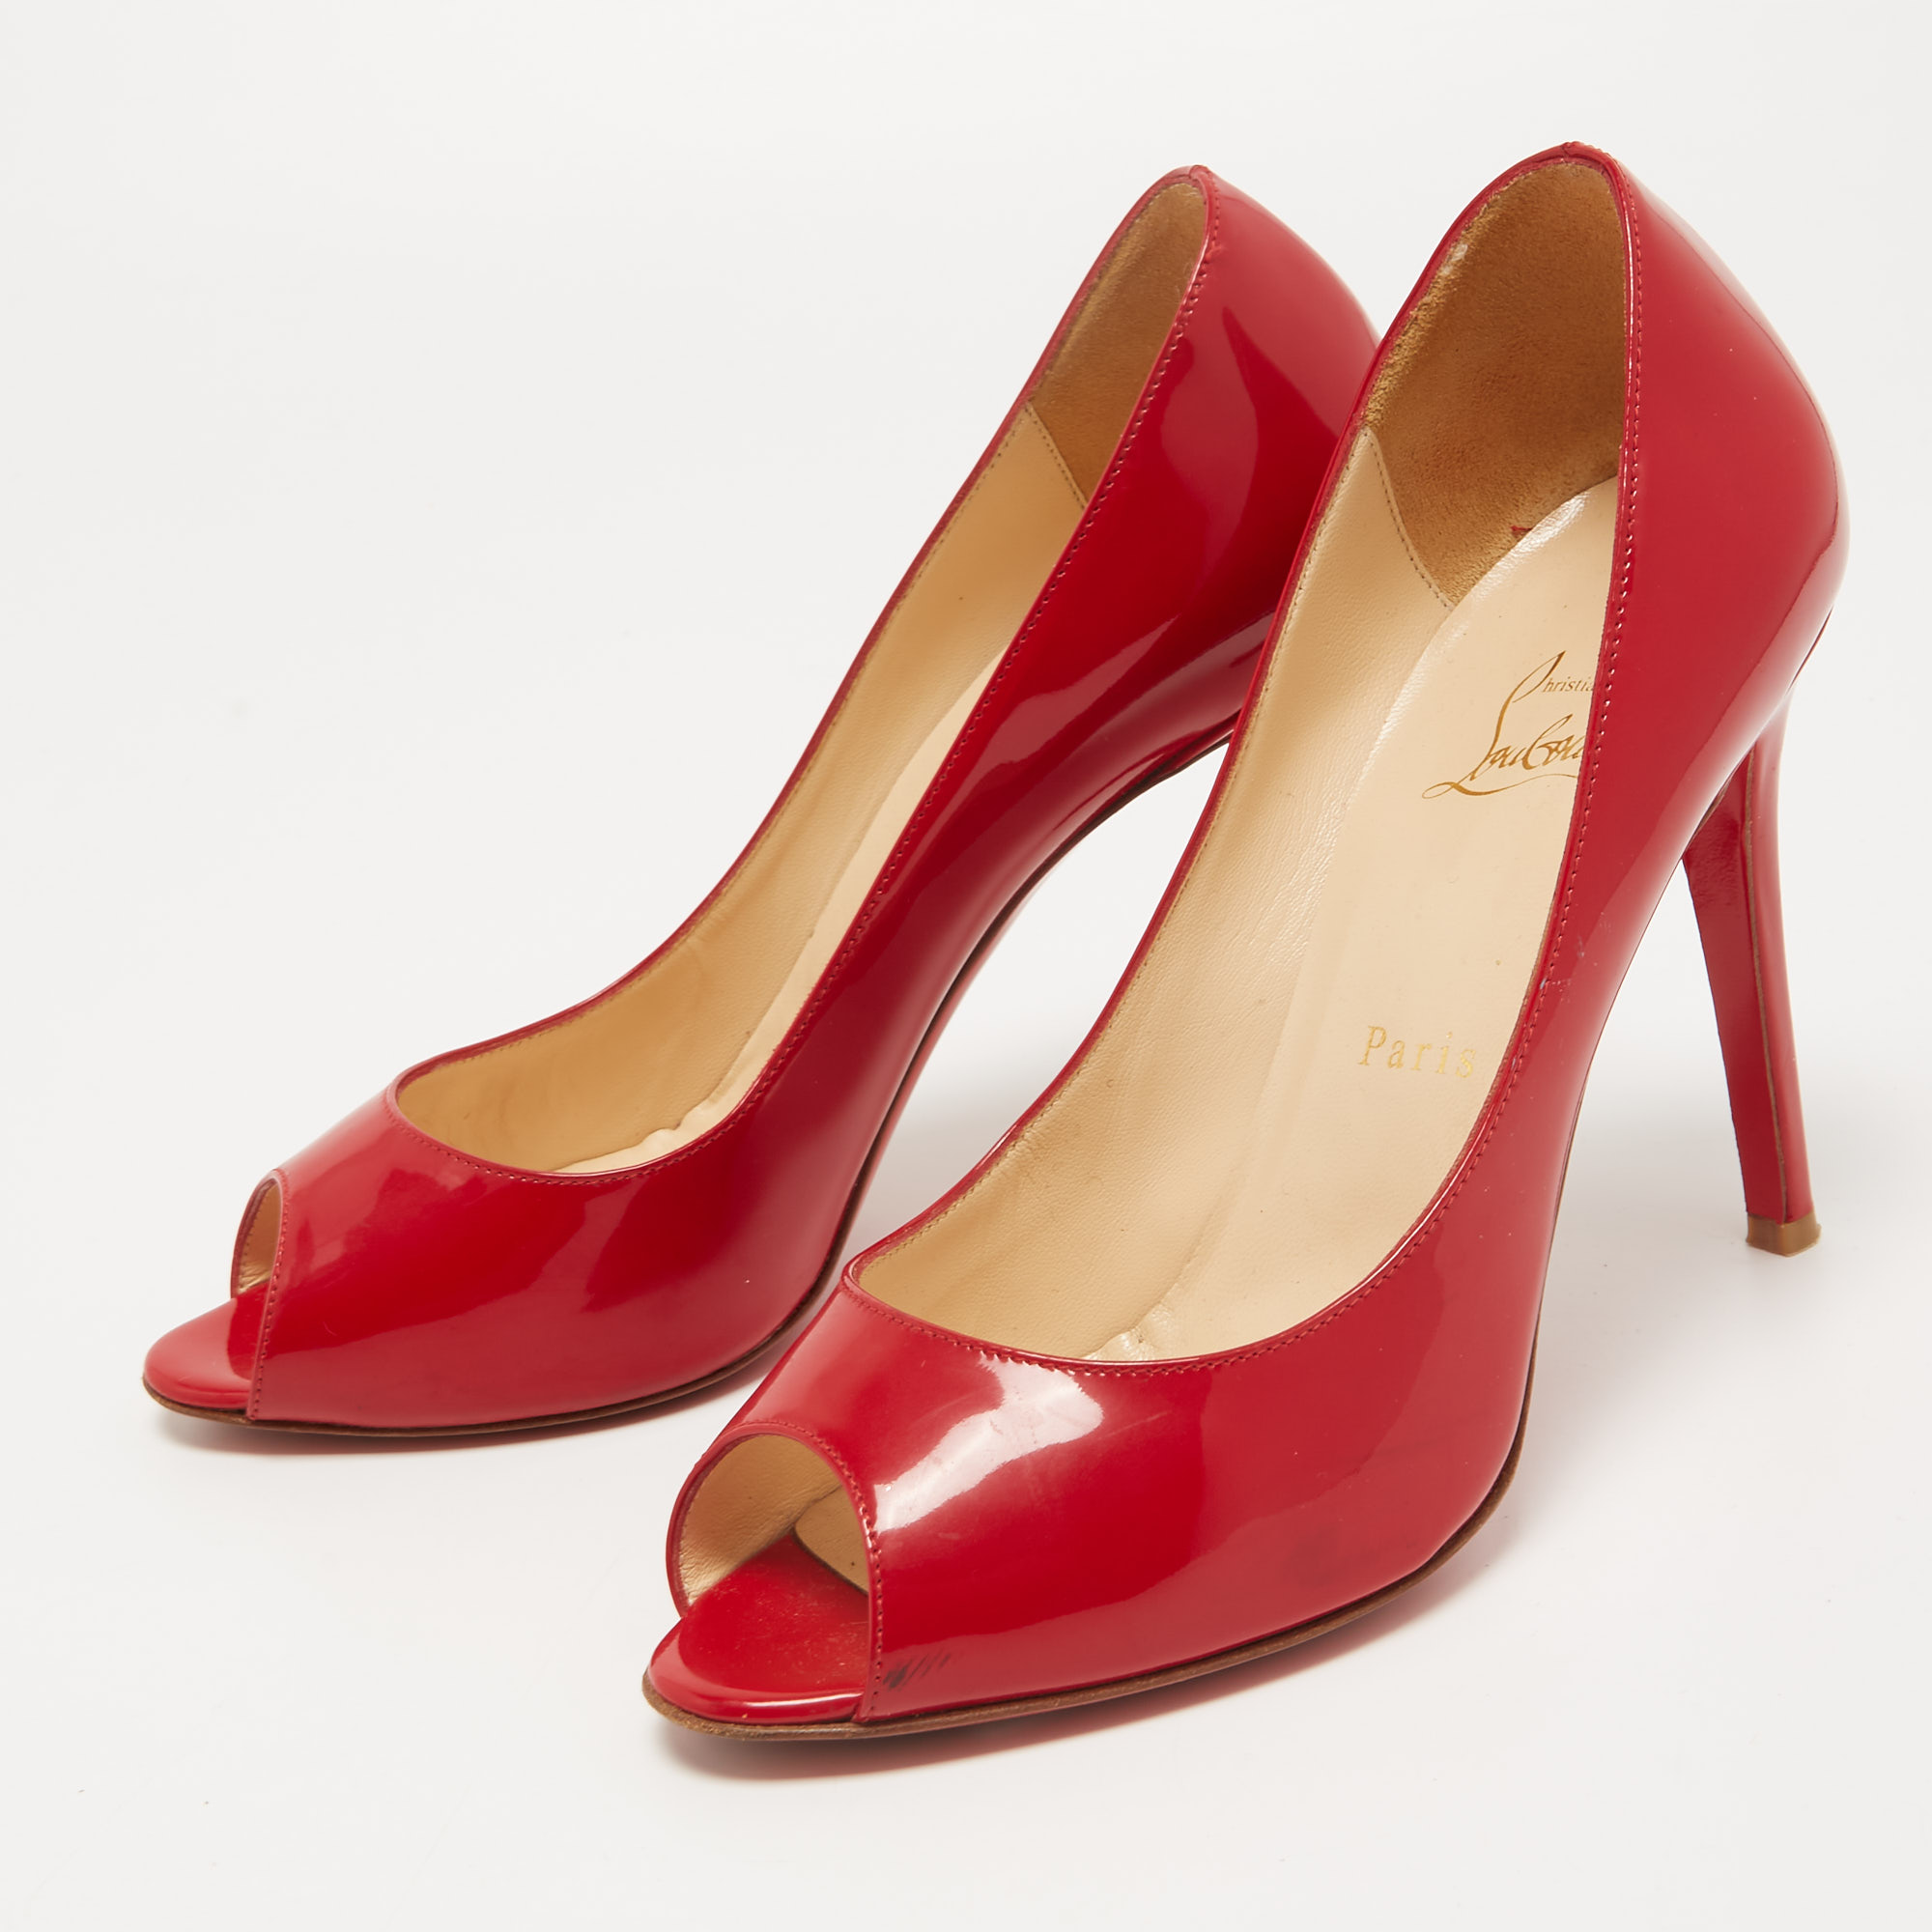 

Christian Louboutin Red Patent Leather Flo Peep Toe Pumps Size